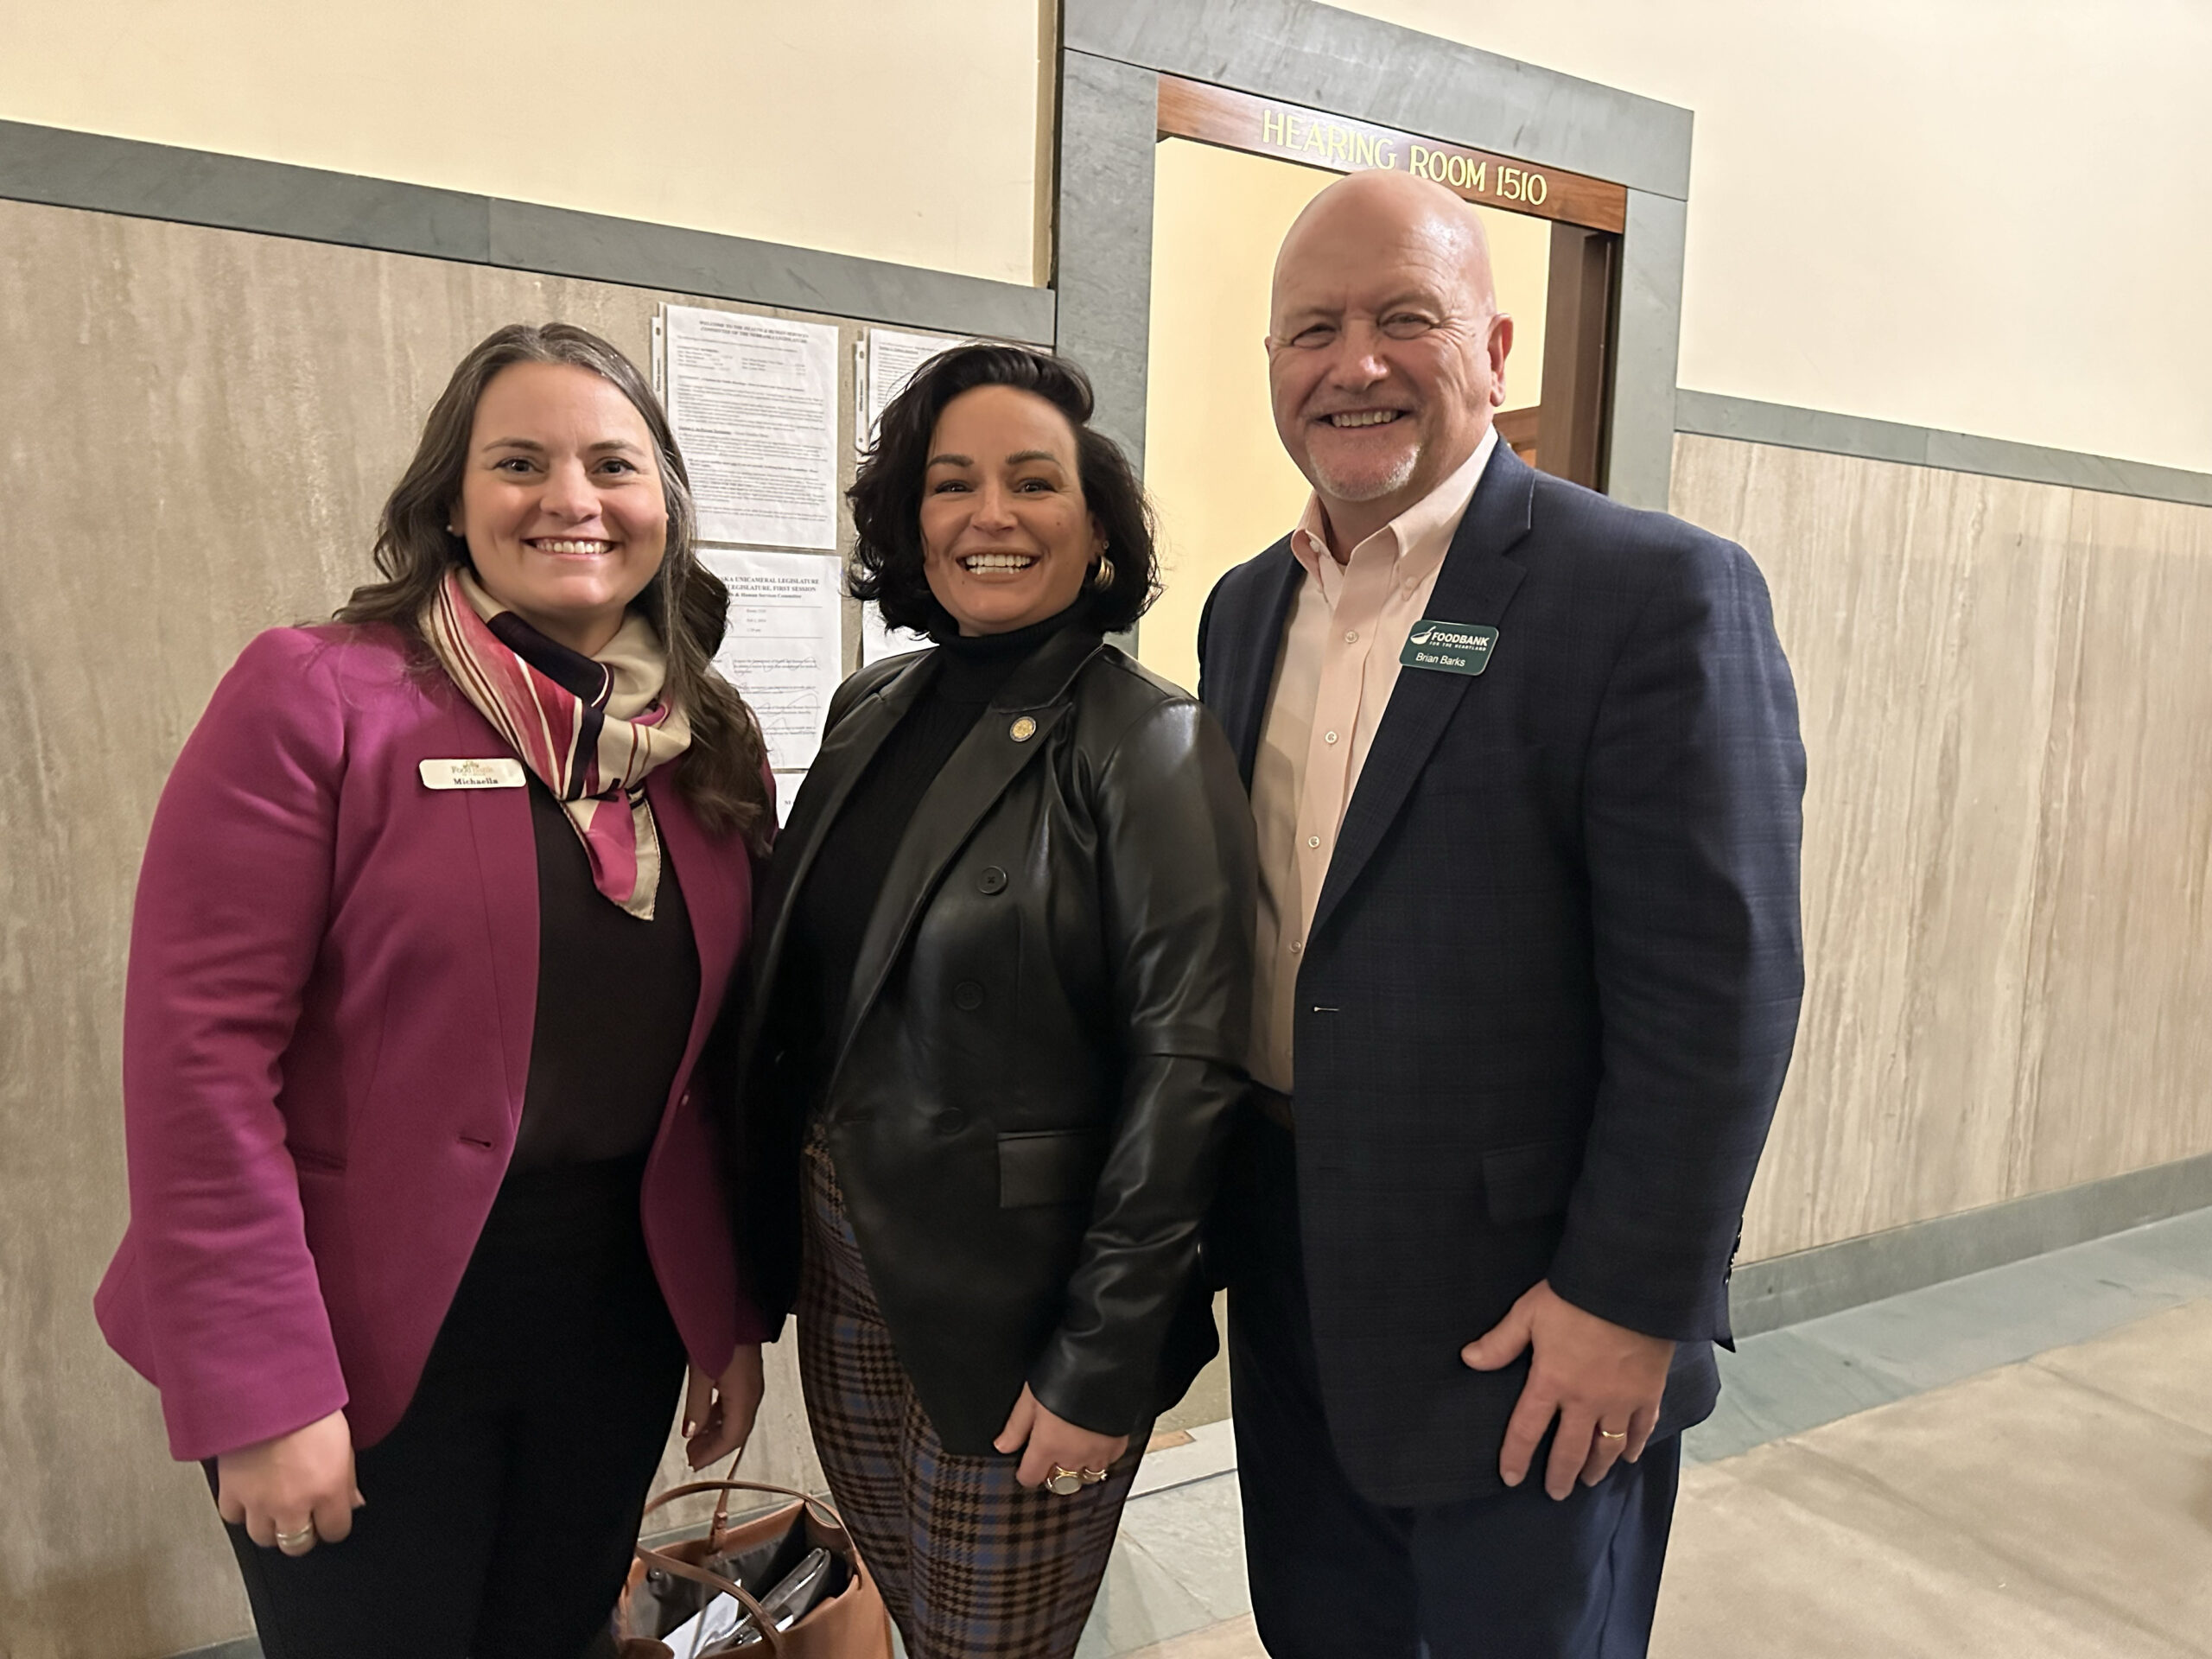 Representatives from Food Bank of Lincoln and Food Bank for the Heartland pose with Senator Jen Day (middle) in support of LB952, which would require the Department of Health and Human Services to implement the federal Summer Electronic Benefits Transfer (EBT) Program.